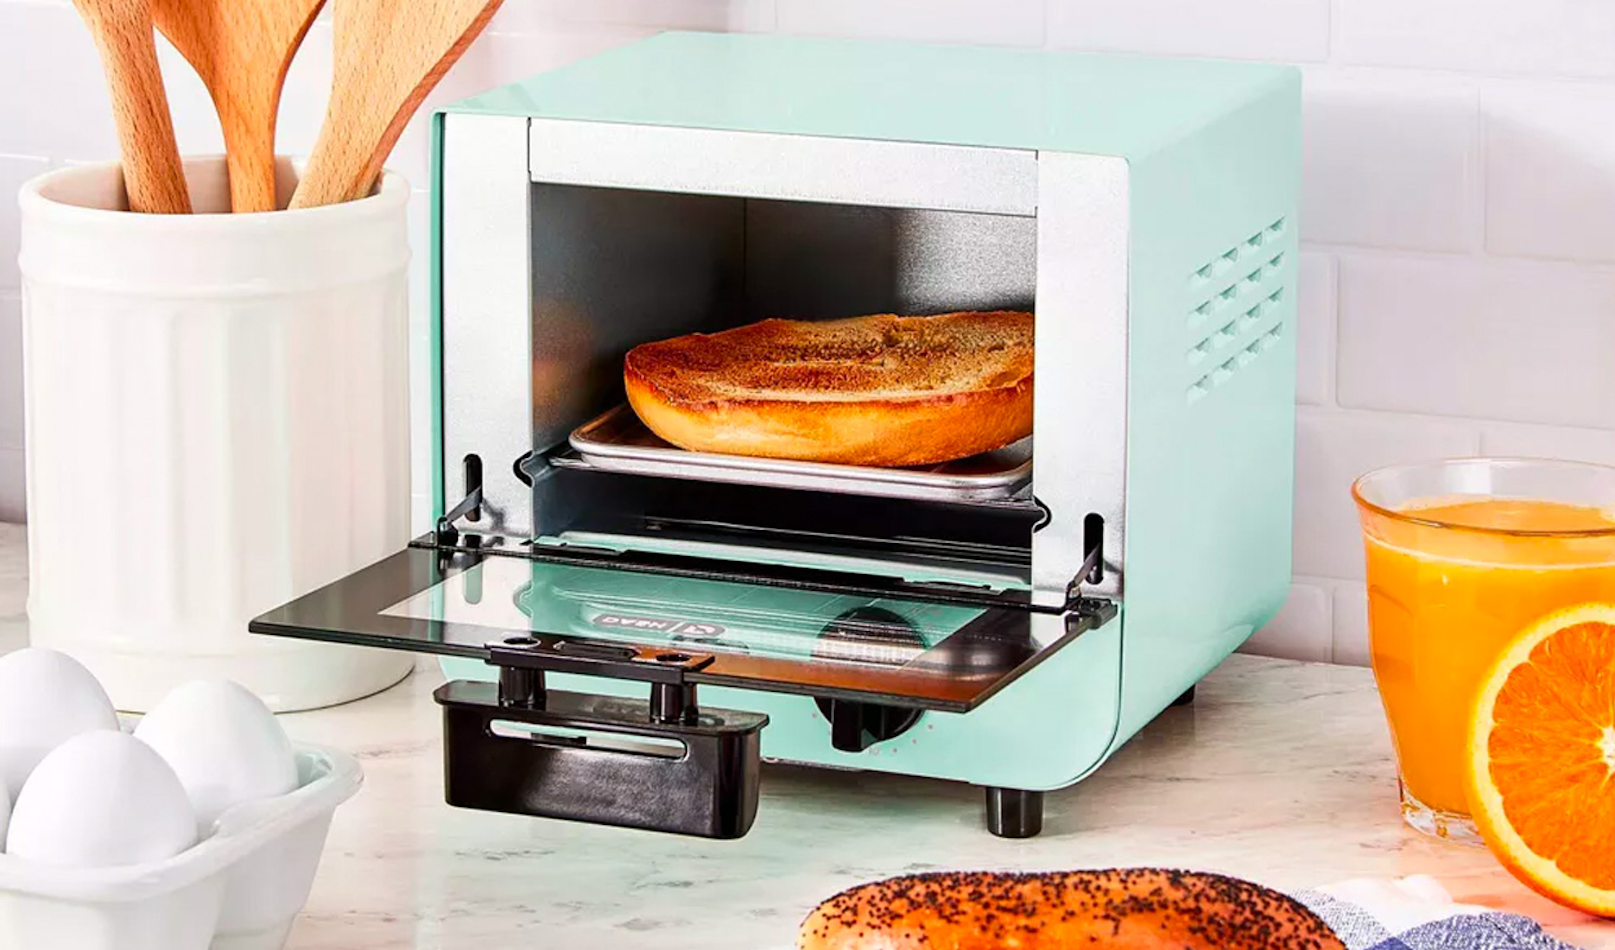 https://www.purewow.com/stories/the-best-toaster-ovens-for-a-hassle-free-meal/assets/1.png